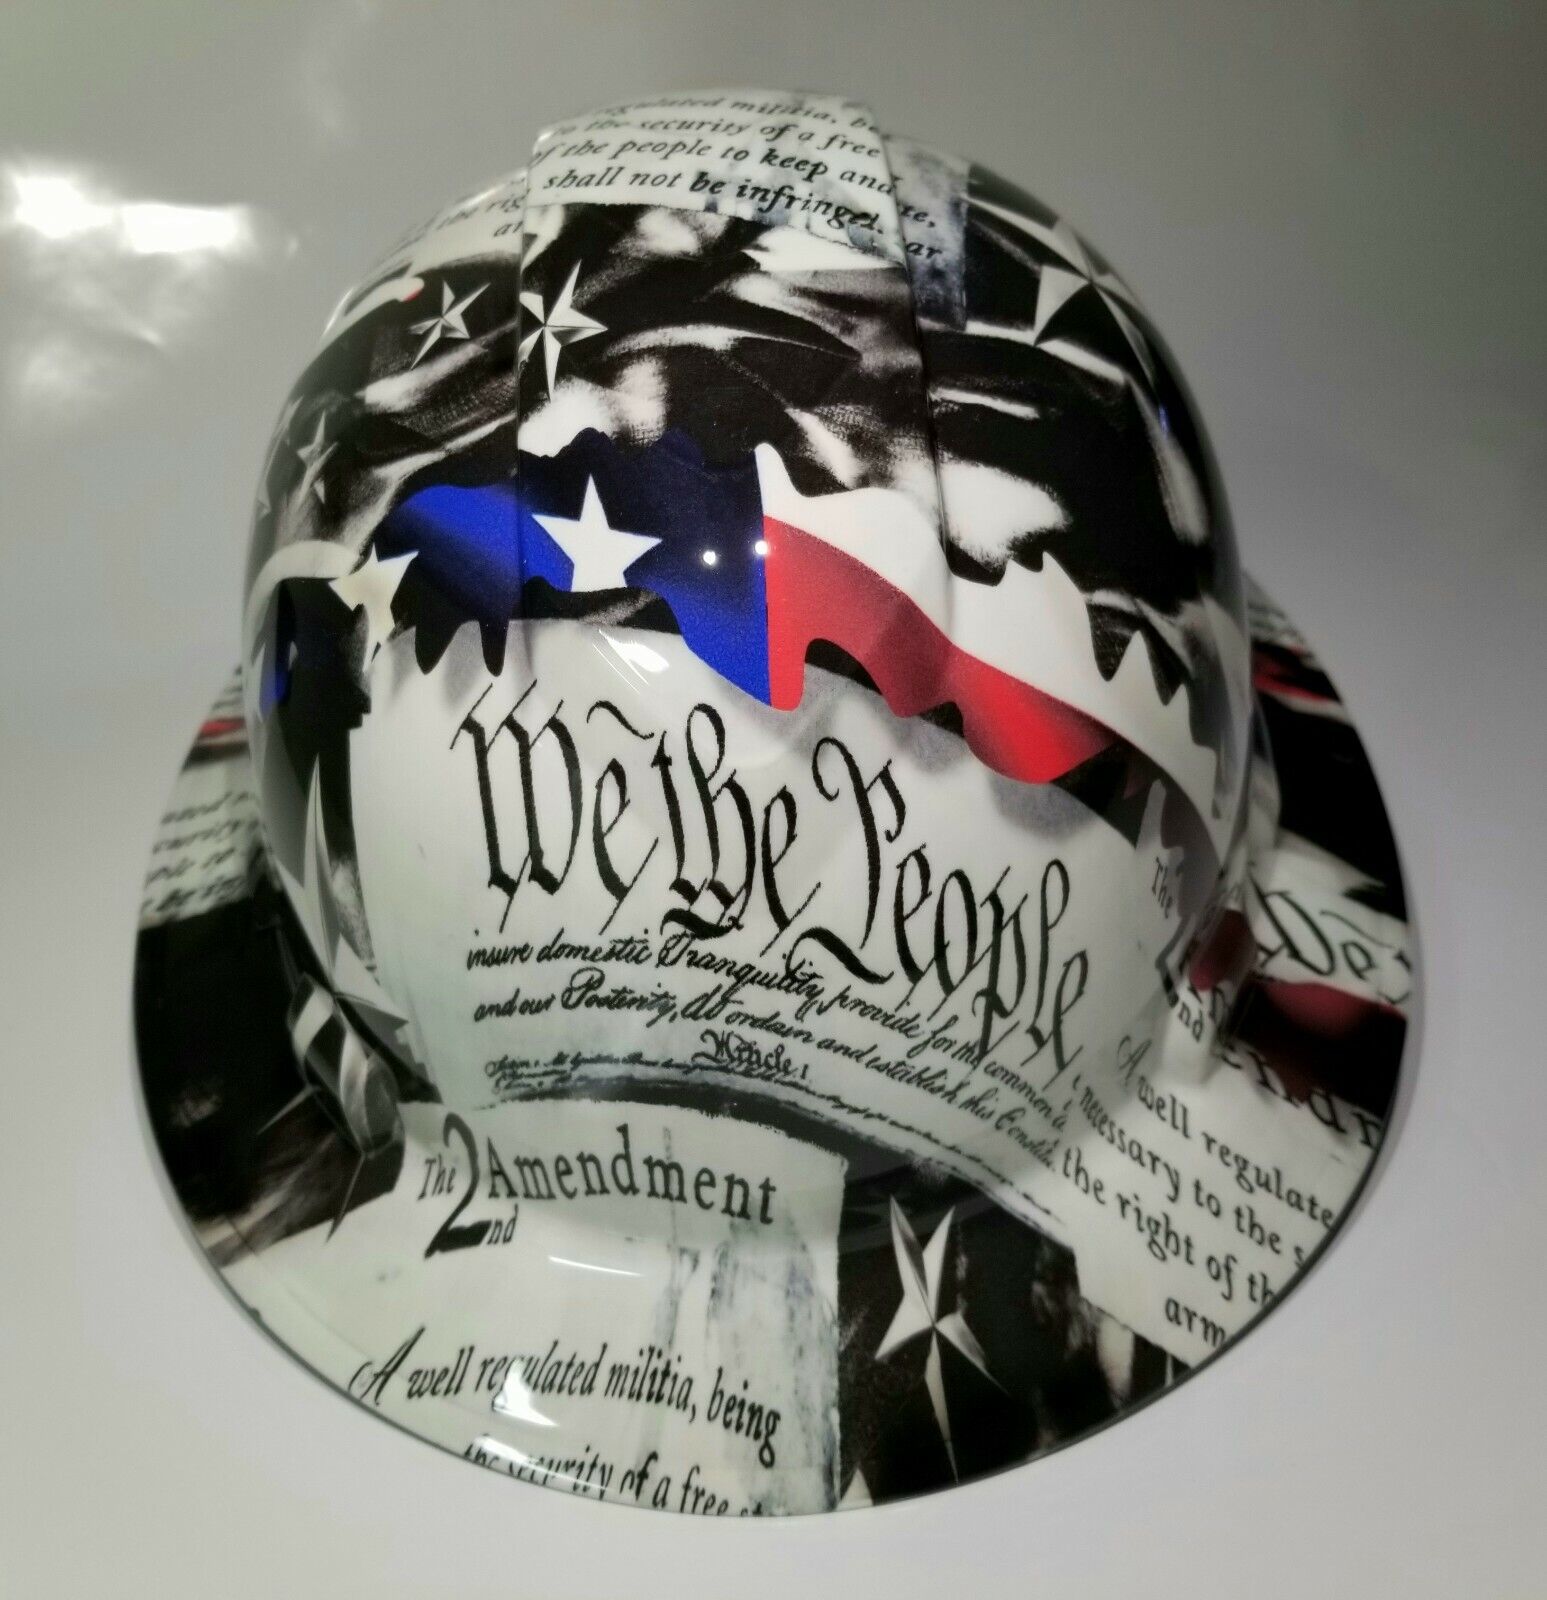 NEW FULL BRIM Hard Hat custom hydro dipped 2ND AMENDMENT IN YOUR FACE EDITION 